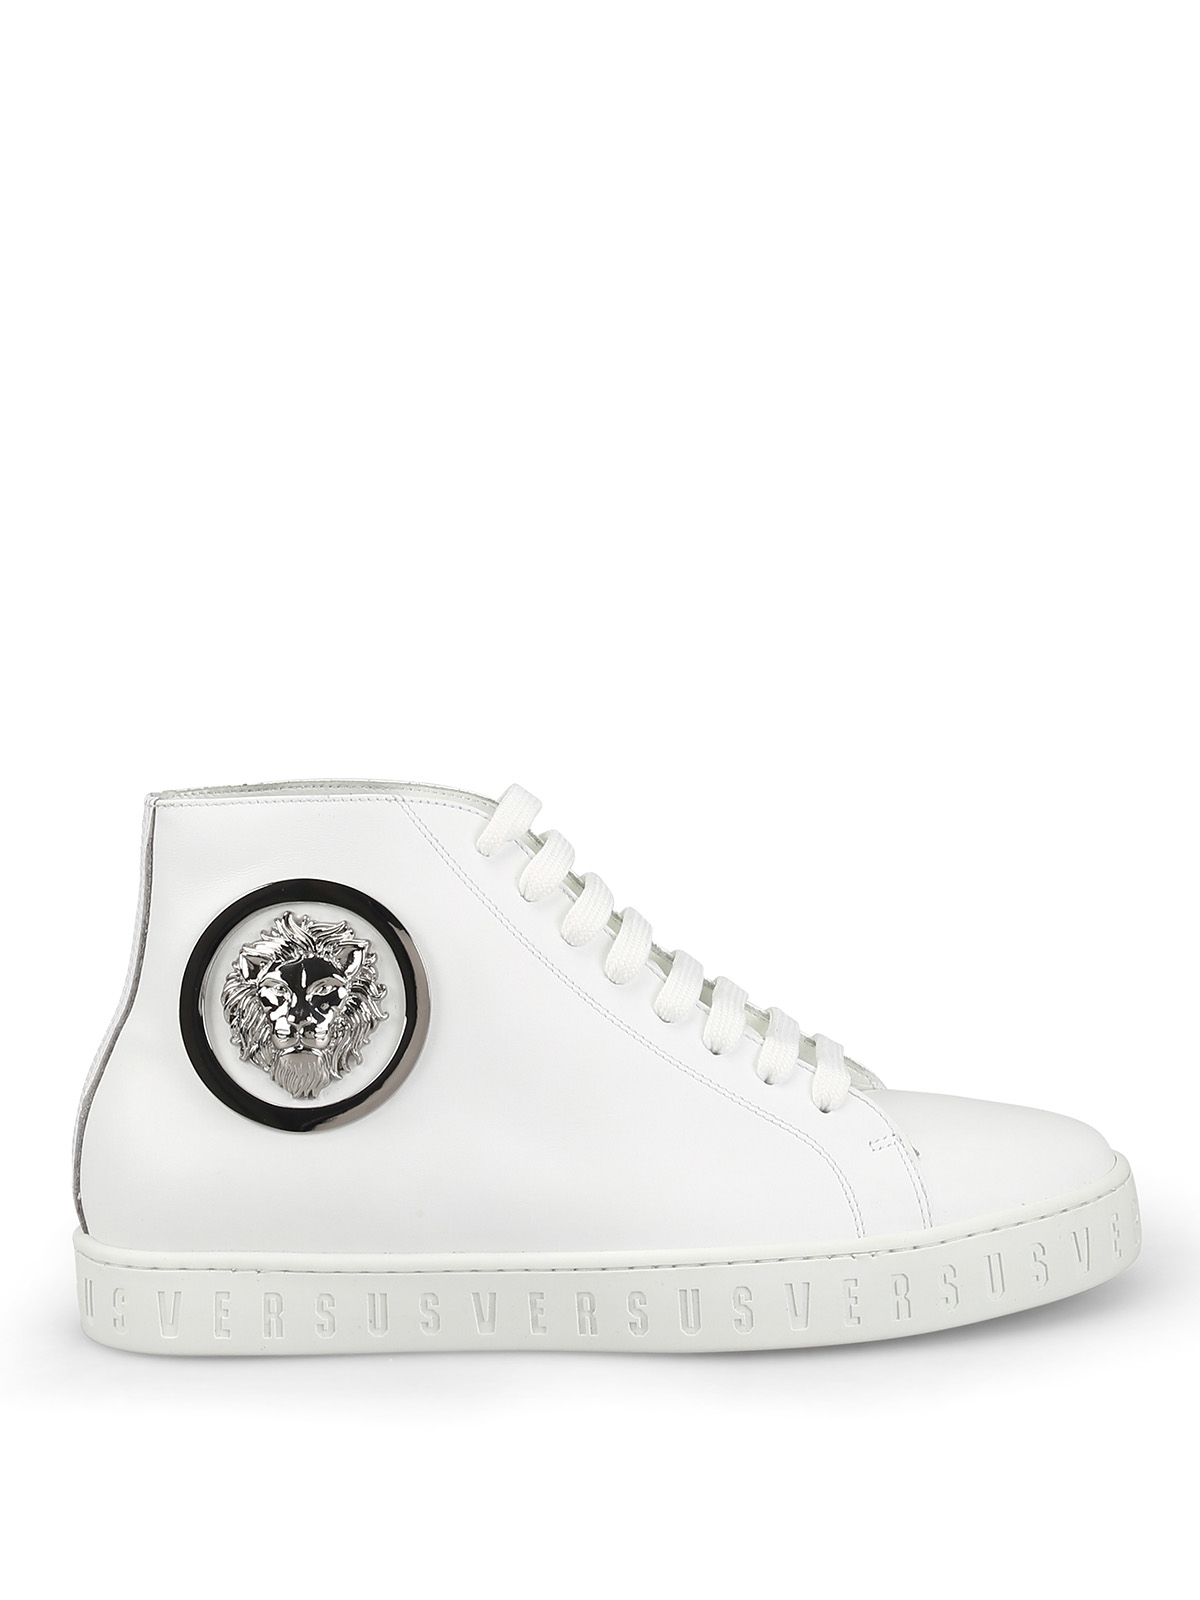 Ontslag Lima Met name Trainers Versus Versace - Lion Head high top white leather sneakers -  FSX082CFVTF037N